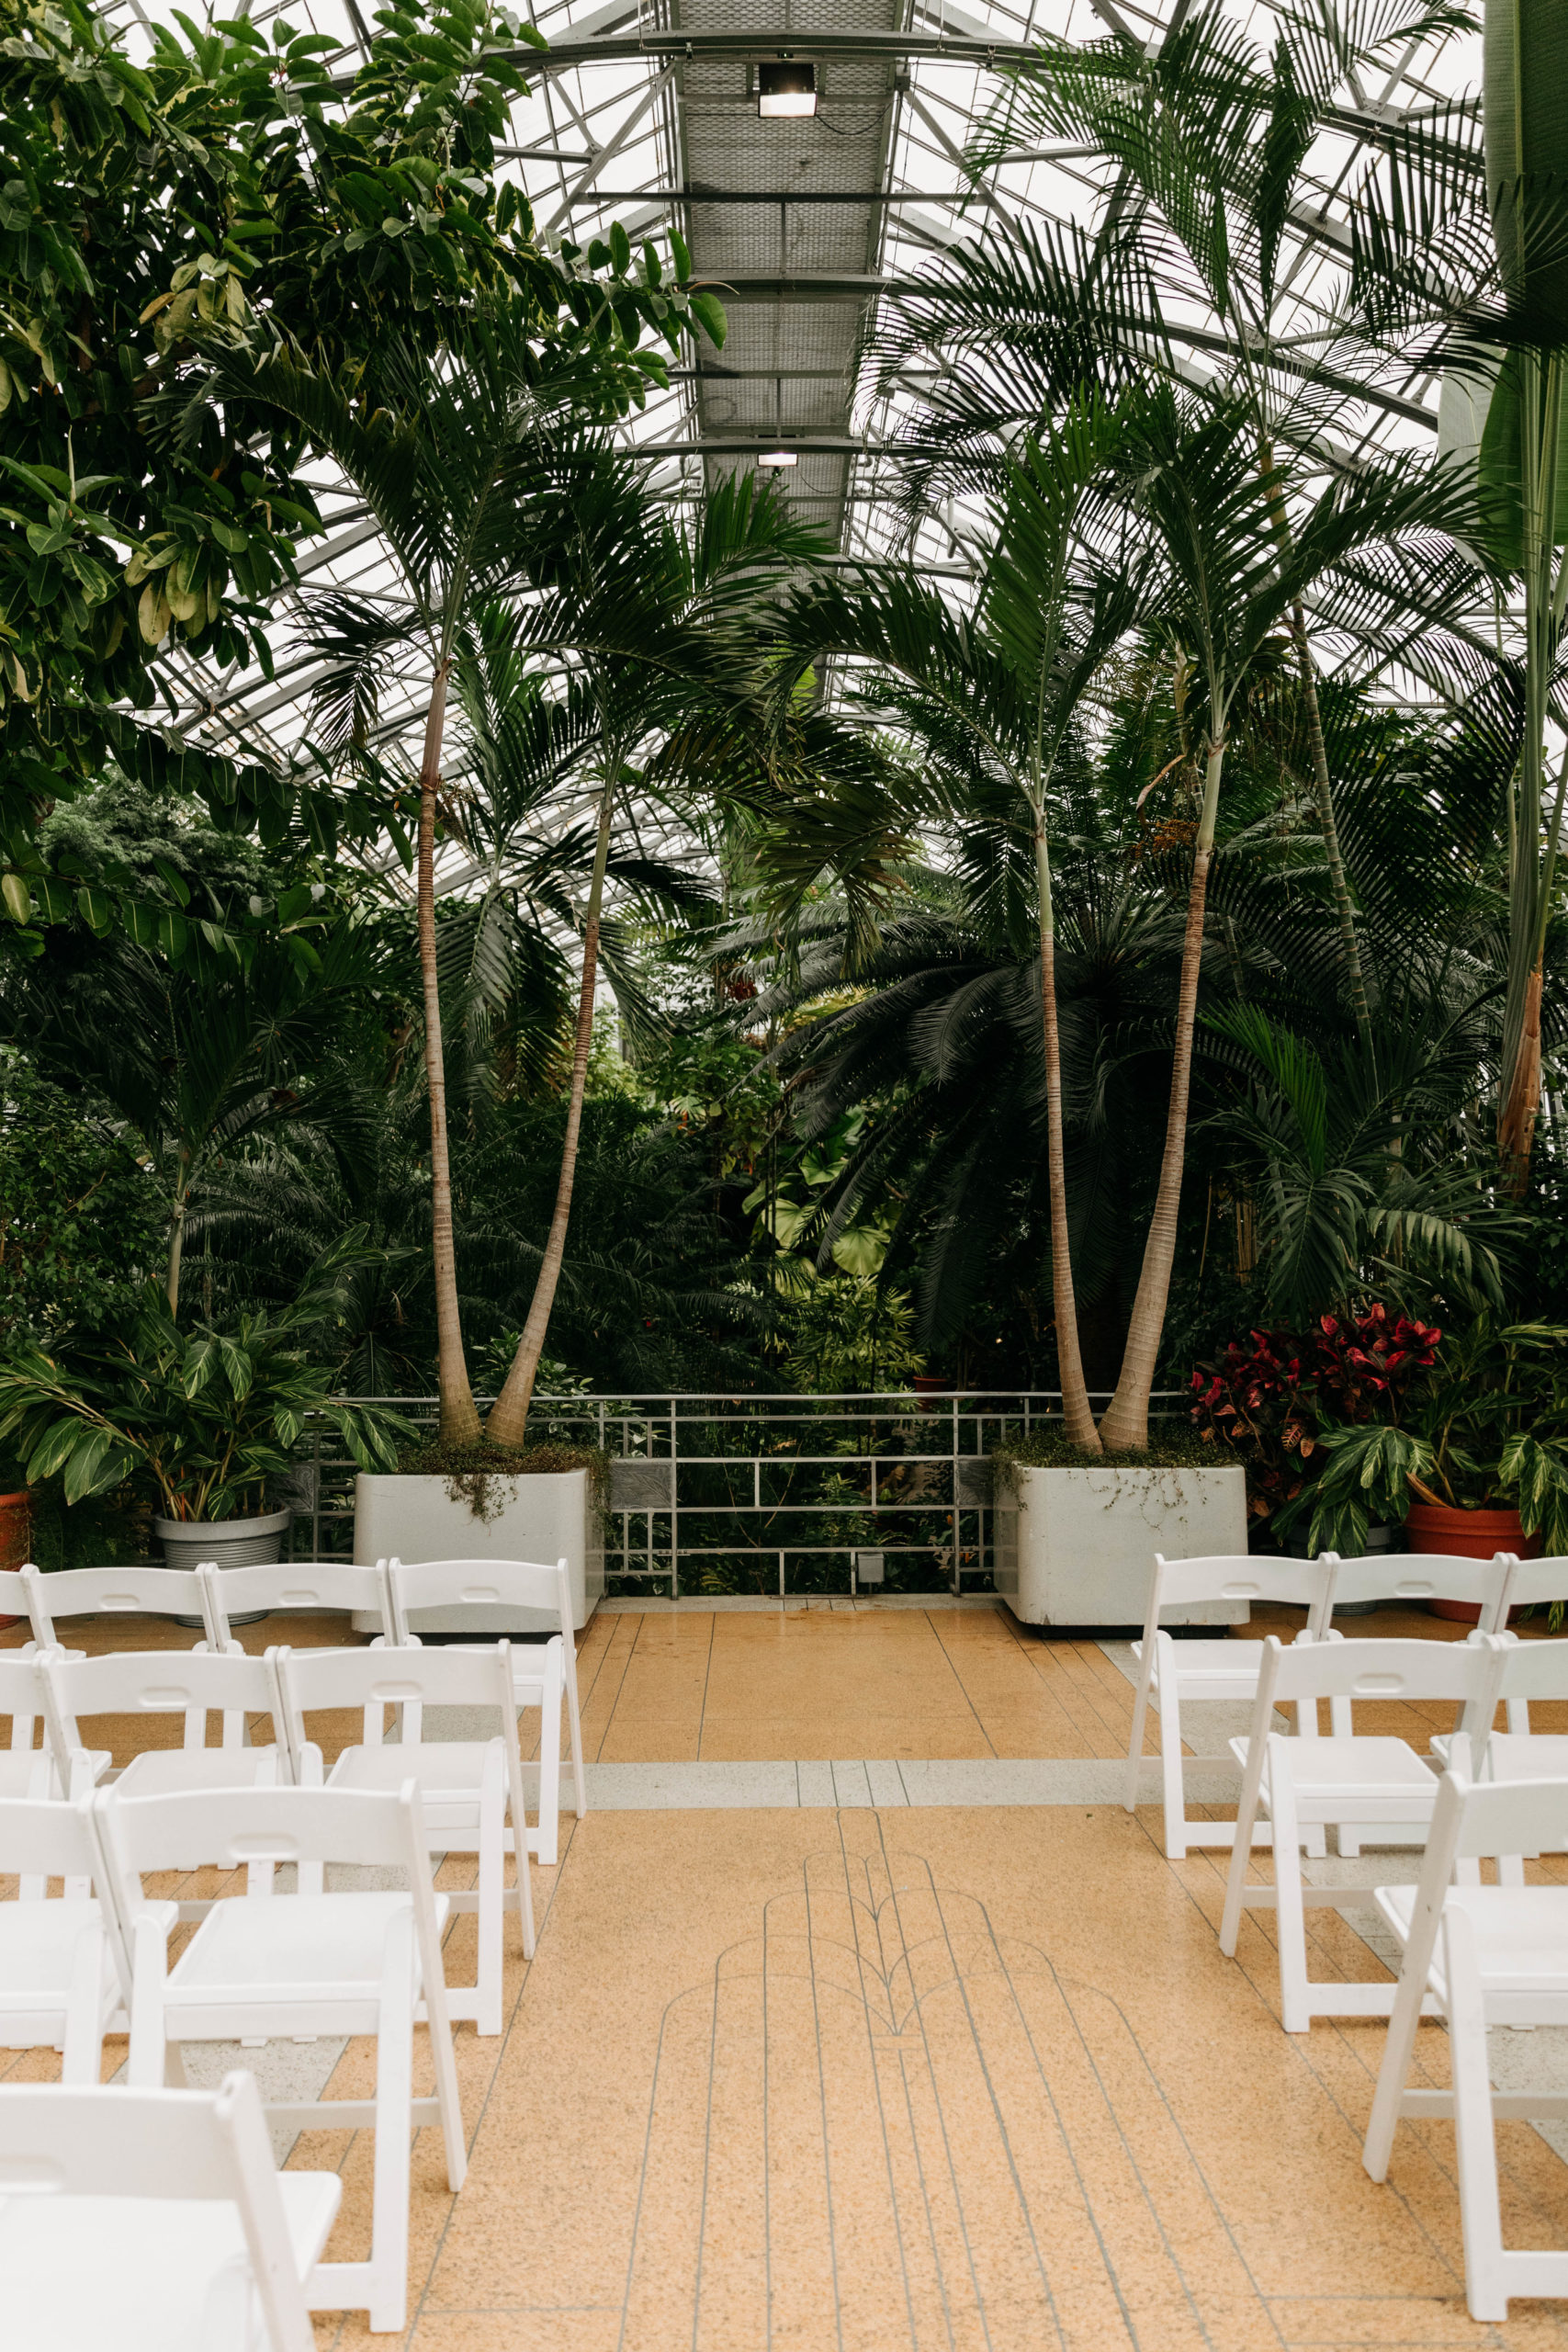 Greenhouse Wedding Ceremony Set-Up with Chairs at Krohn conservatory in Eden Park, Cincinnati Ohio